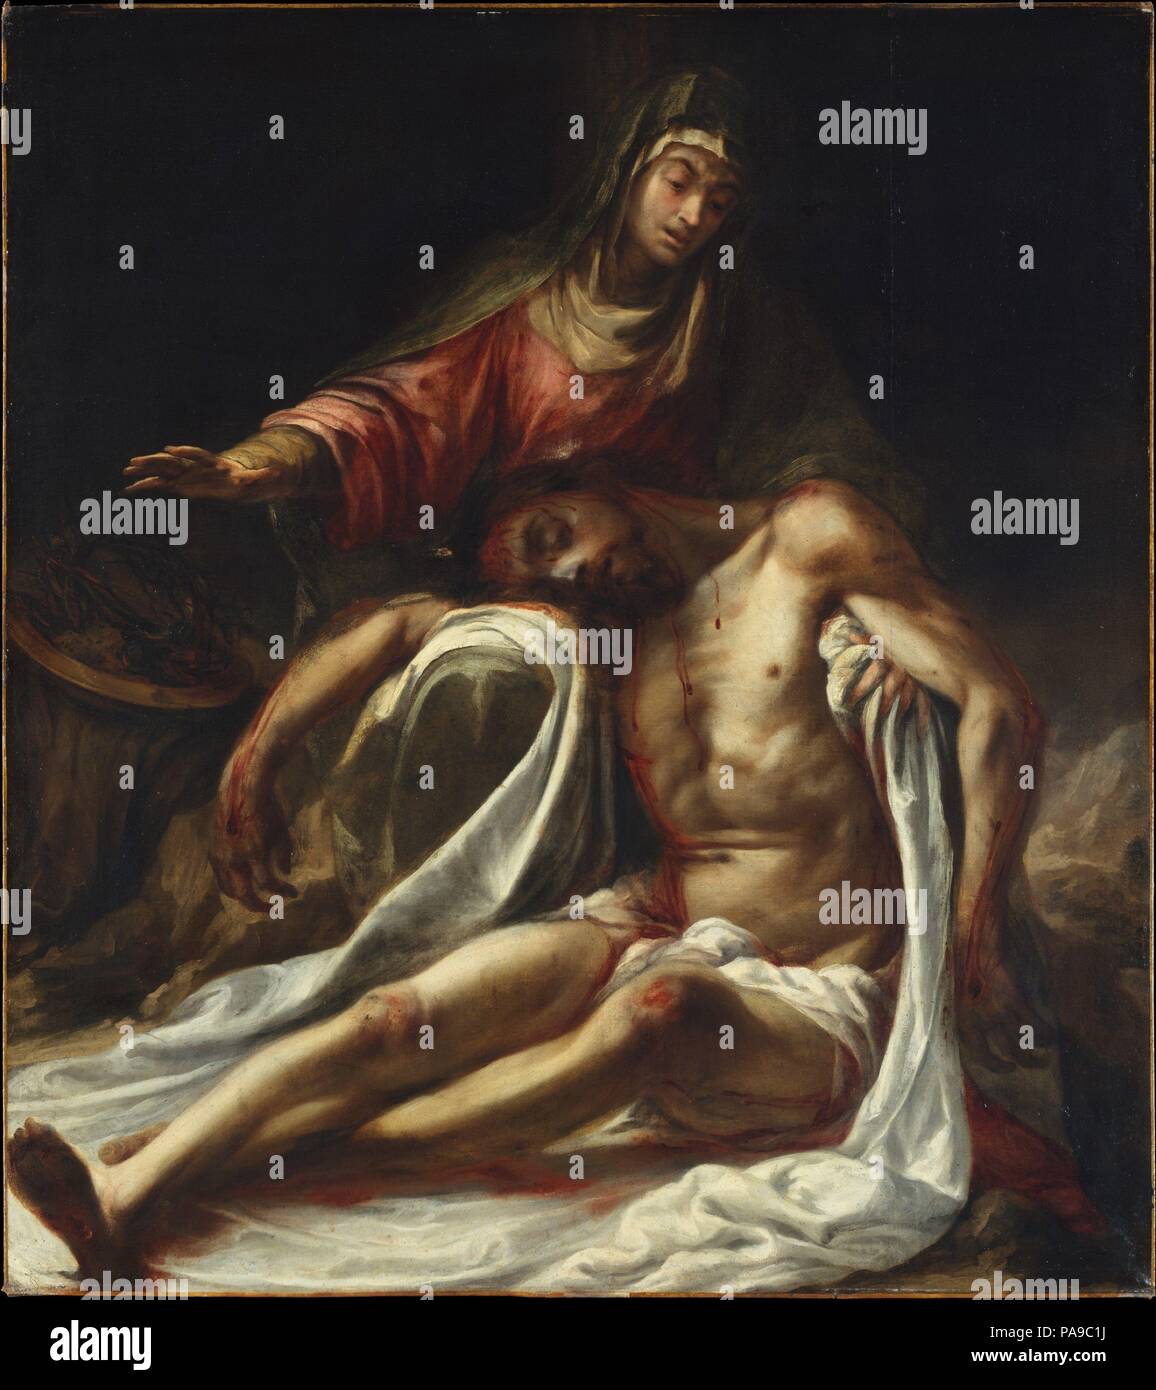 Pietà. Artist: Juan de Valdés Leal (Spanish, Seville 1622-1690 Seville). Dimensions: 63 1/4 x 56 1/2 in. (160.7 x 143.5 cm). Date: ca. 1657-60.  Valdés Leal was one of the most prominent artists in Seville in the seventeenth century, specializing in theatrical and dramatic religious paintings for churches of the city. Paintings such as this one were heavily indebted to the example of polychrome sculptures and recall in dramatic intensity the <i>pasos</i>--carved and painted ensembles of religious figures that are paraded through the streets of Spanish cities during the week leading to Easter.  Stock Photo